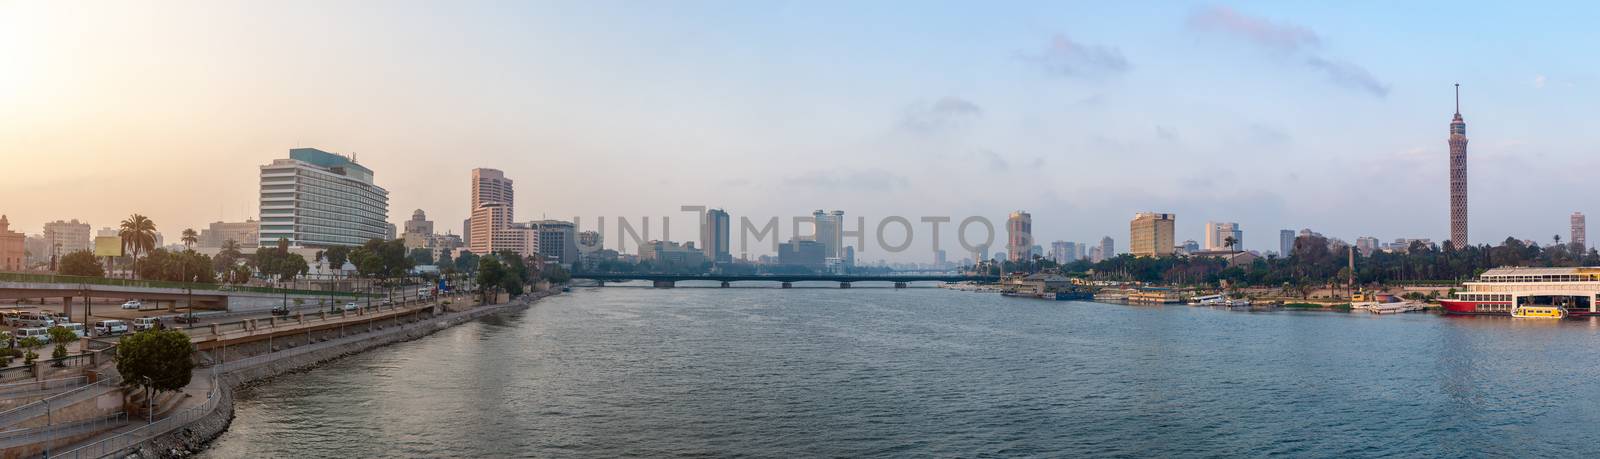 Nile River view of Cairo by Givaga